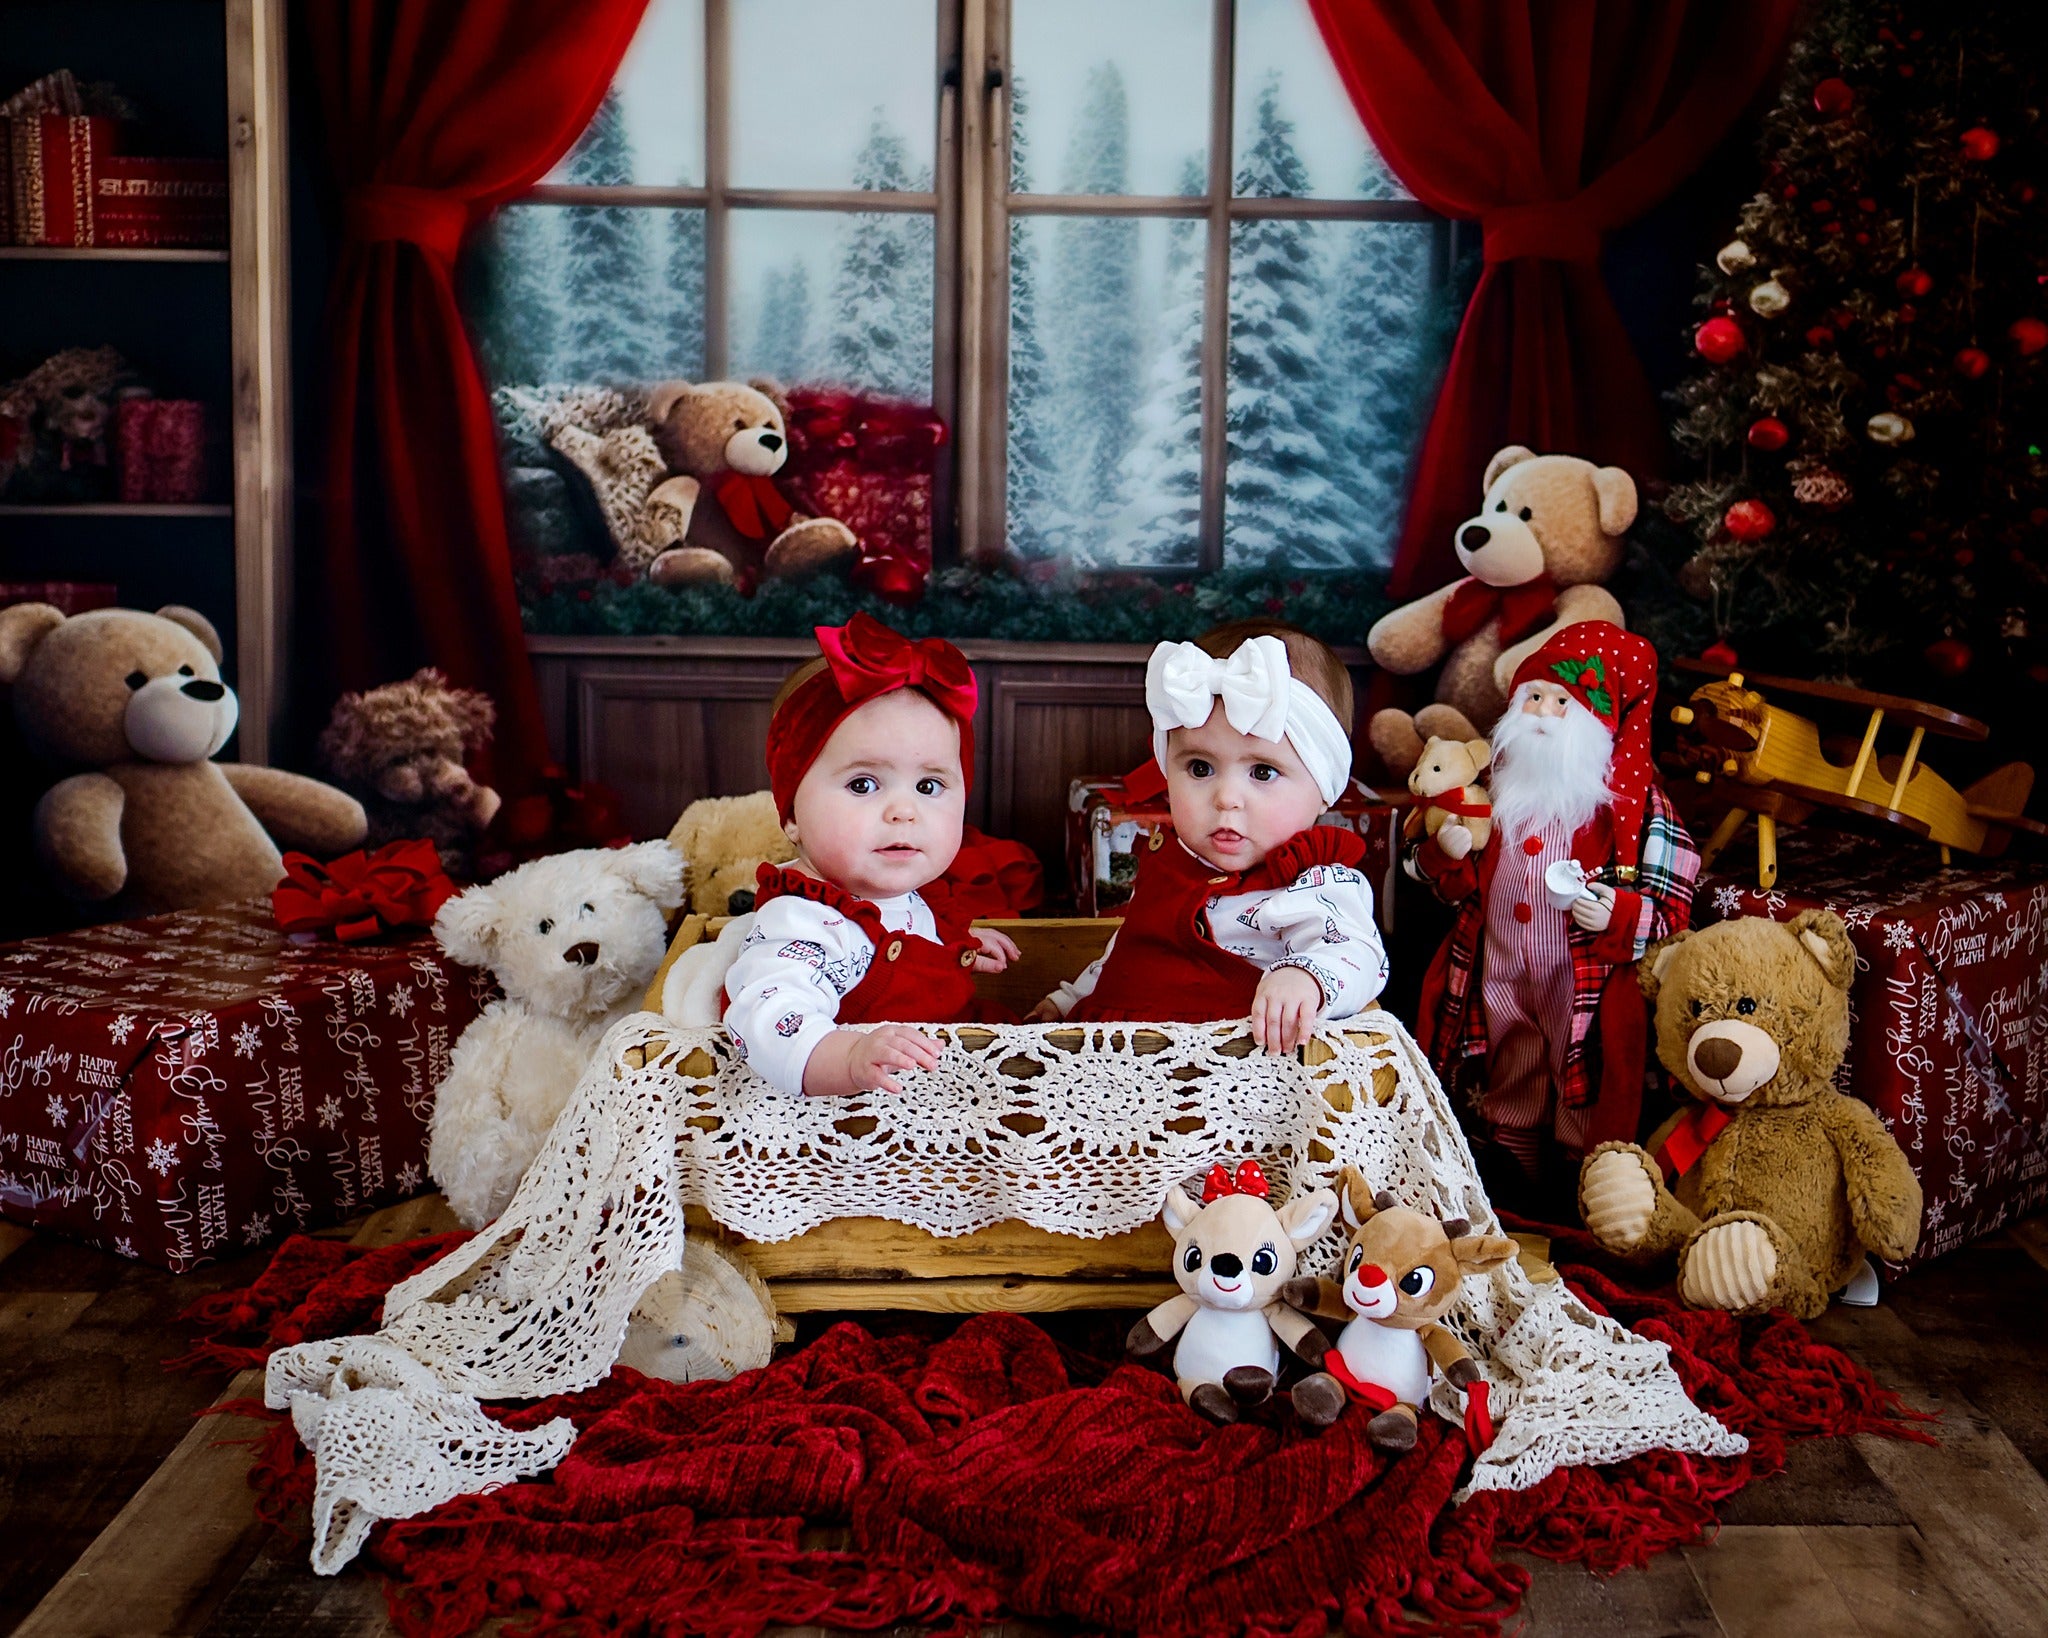 Kate Christmas Room Teddy Bear Windows Backdrop Designed by Chain Photography